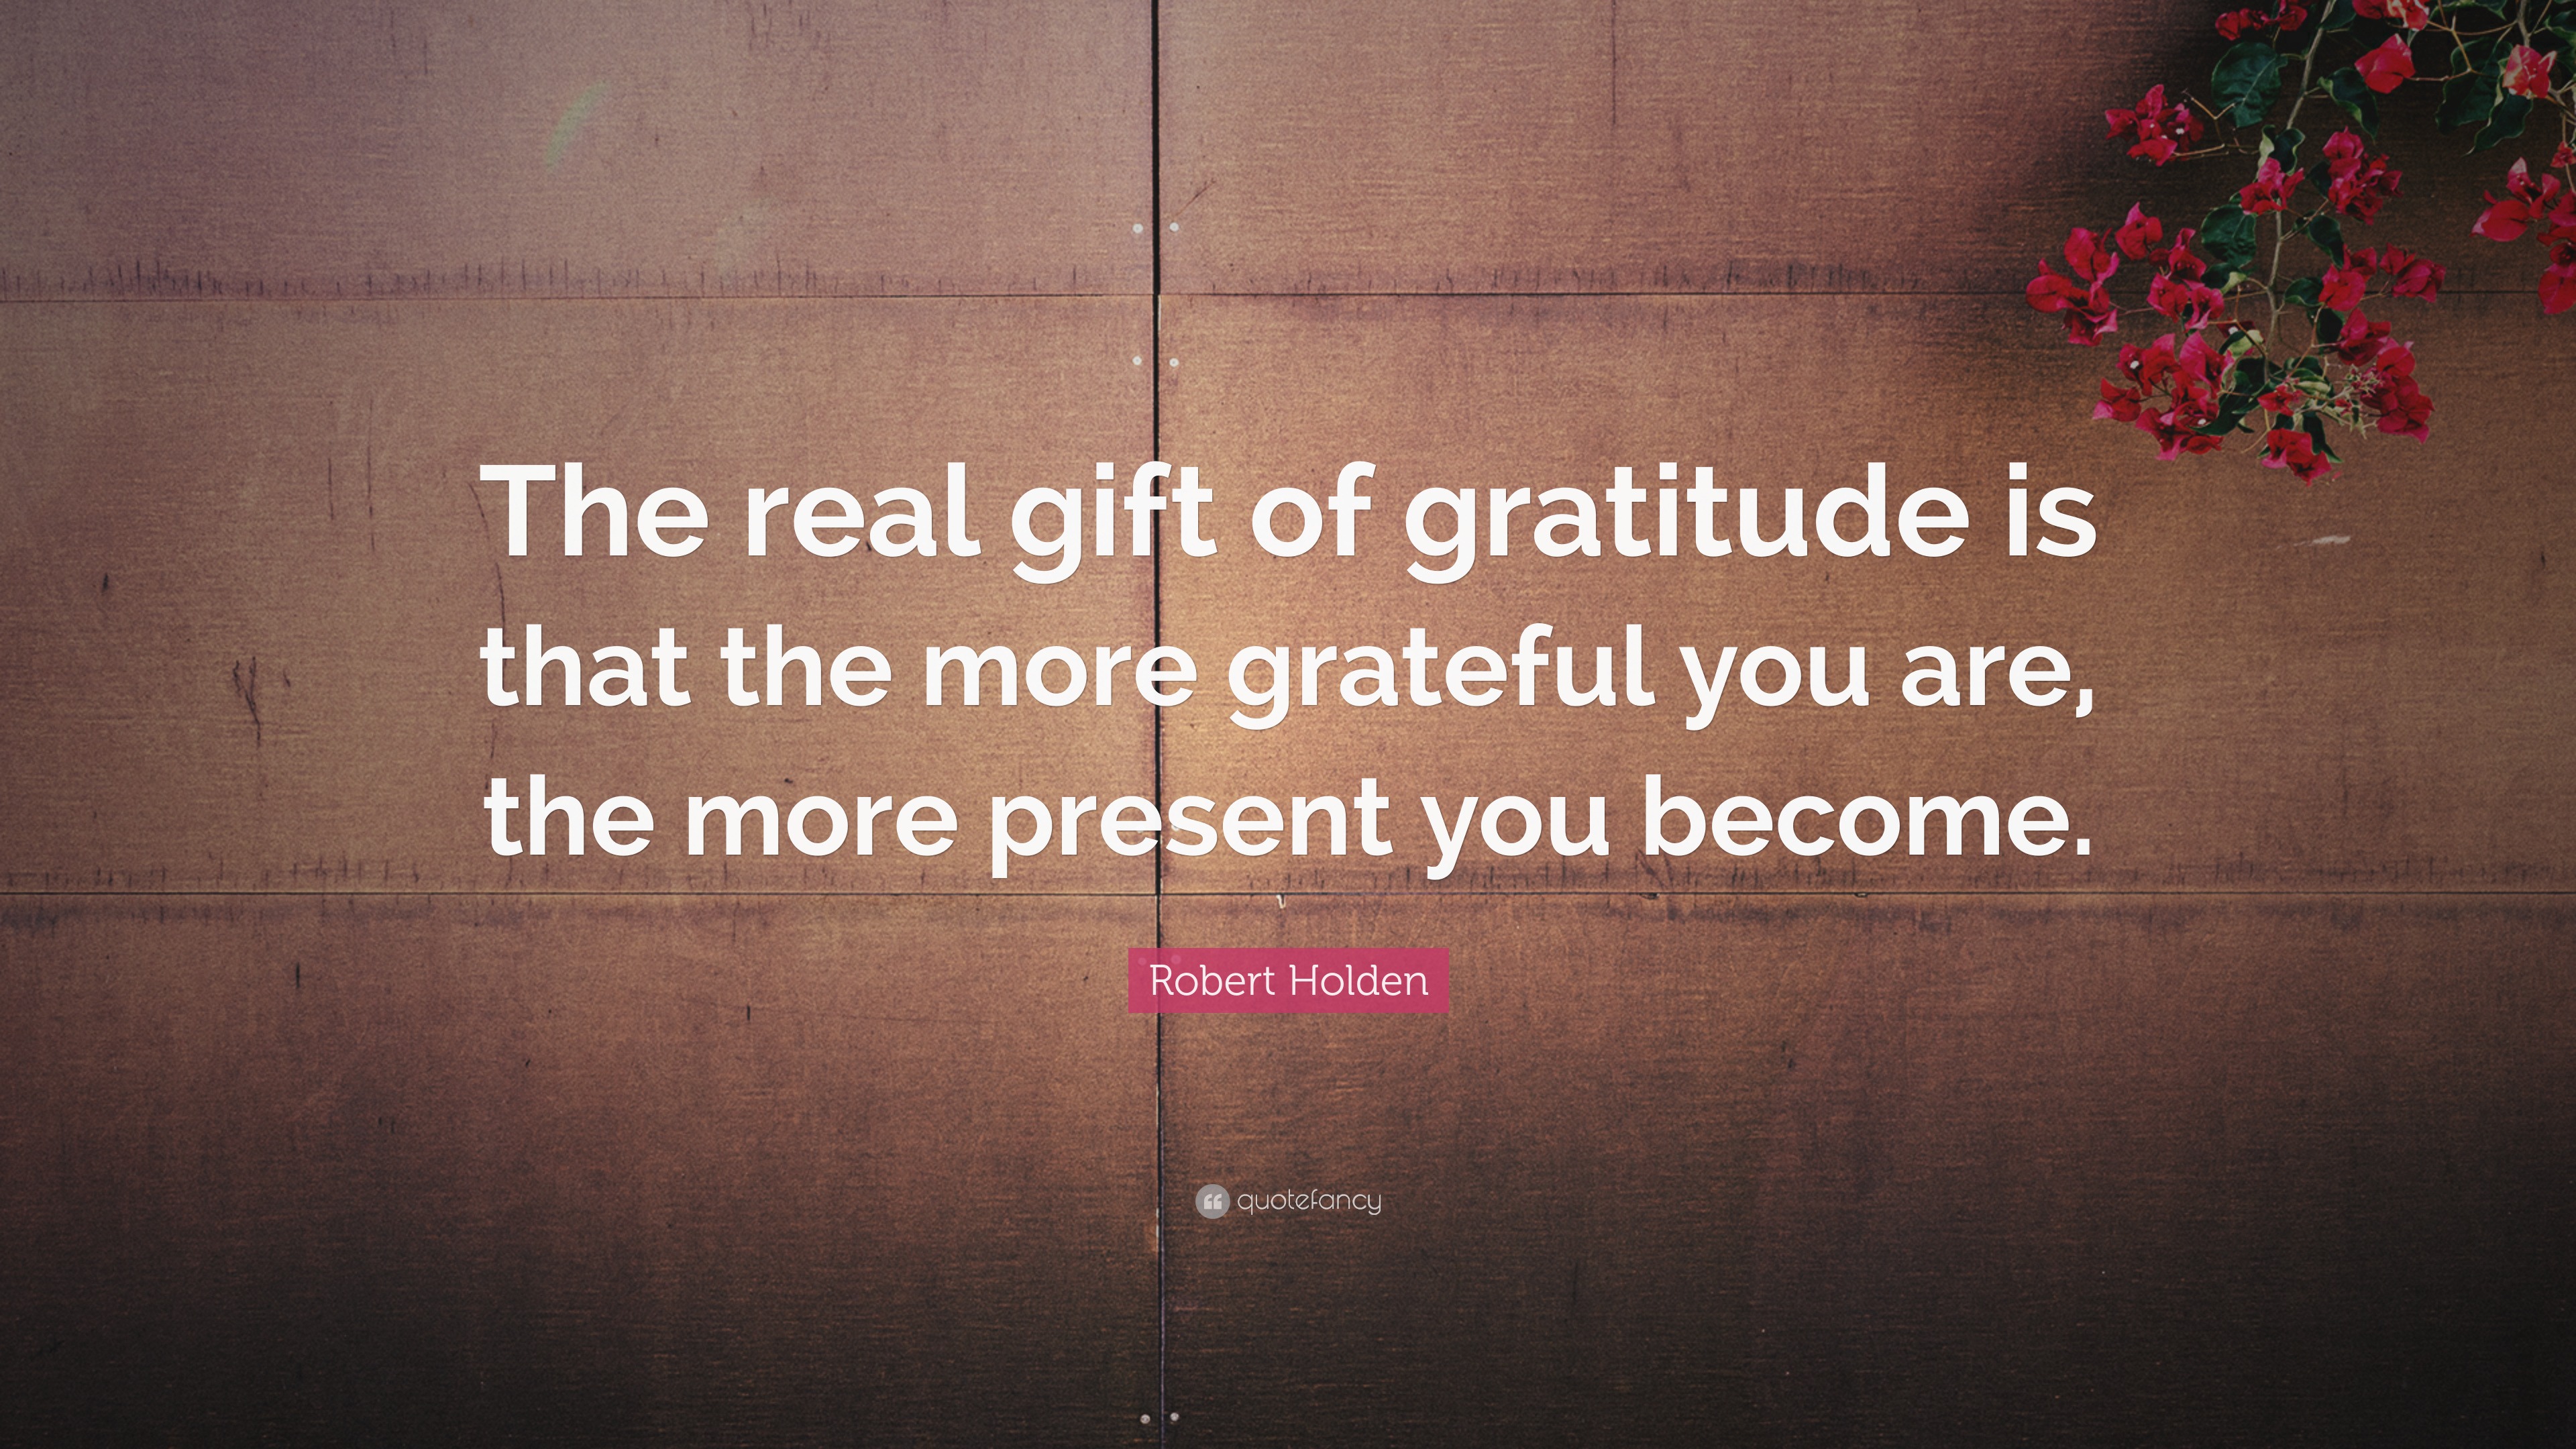 Robert Holden Quote: “The real gift of gratitude is that the more ...